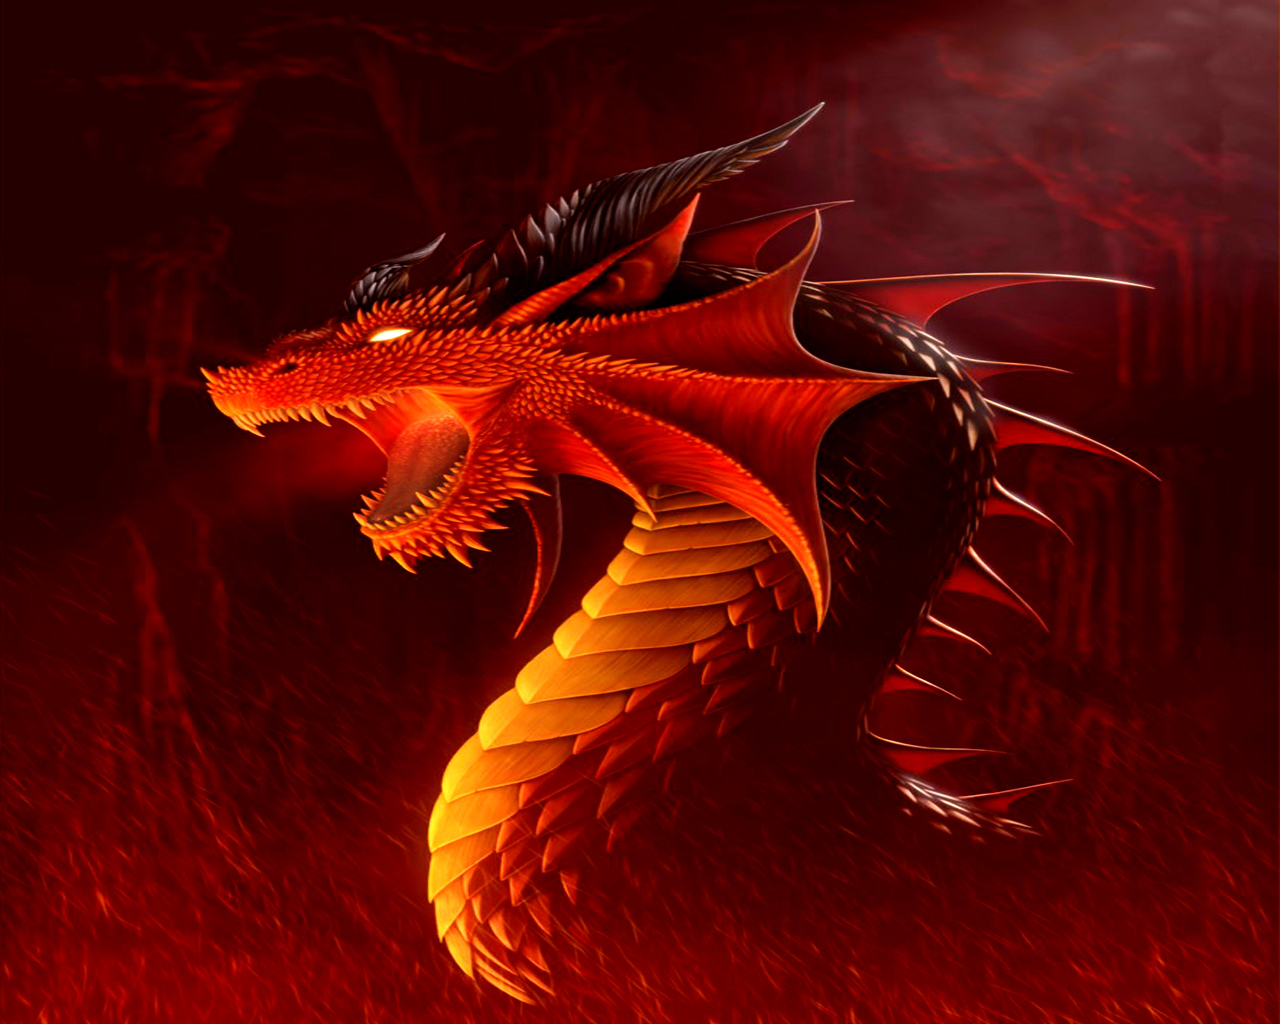  about Red Dragons or even videos related to red dragon